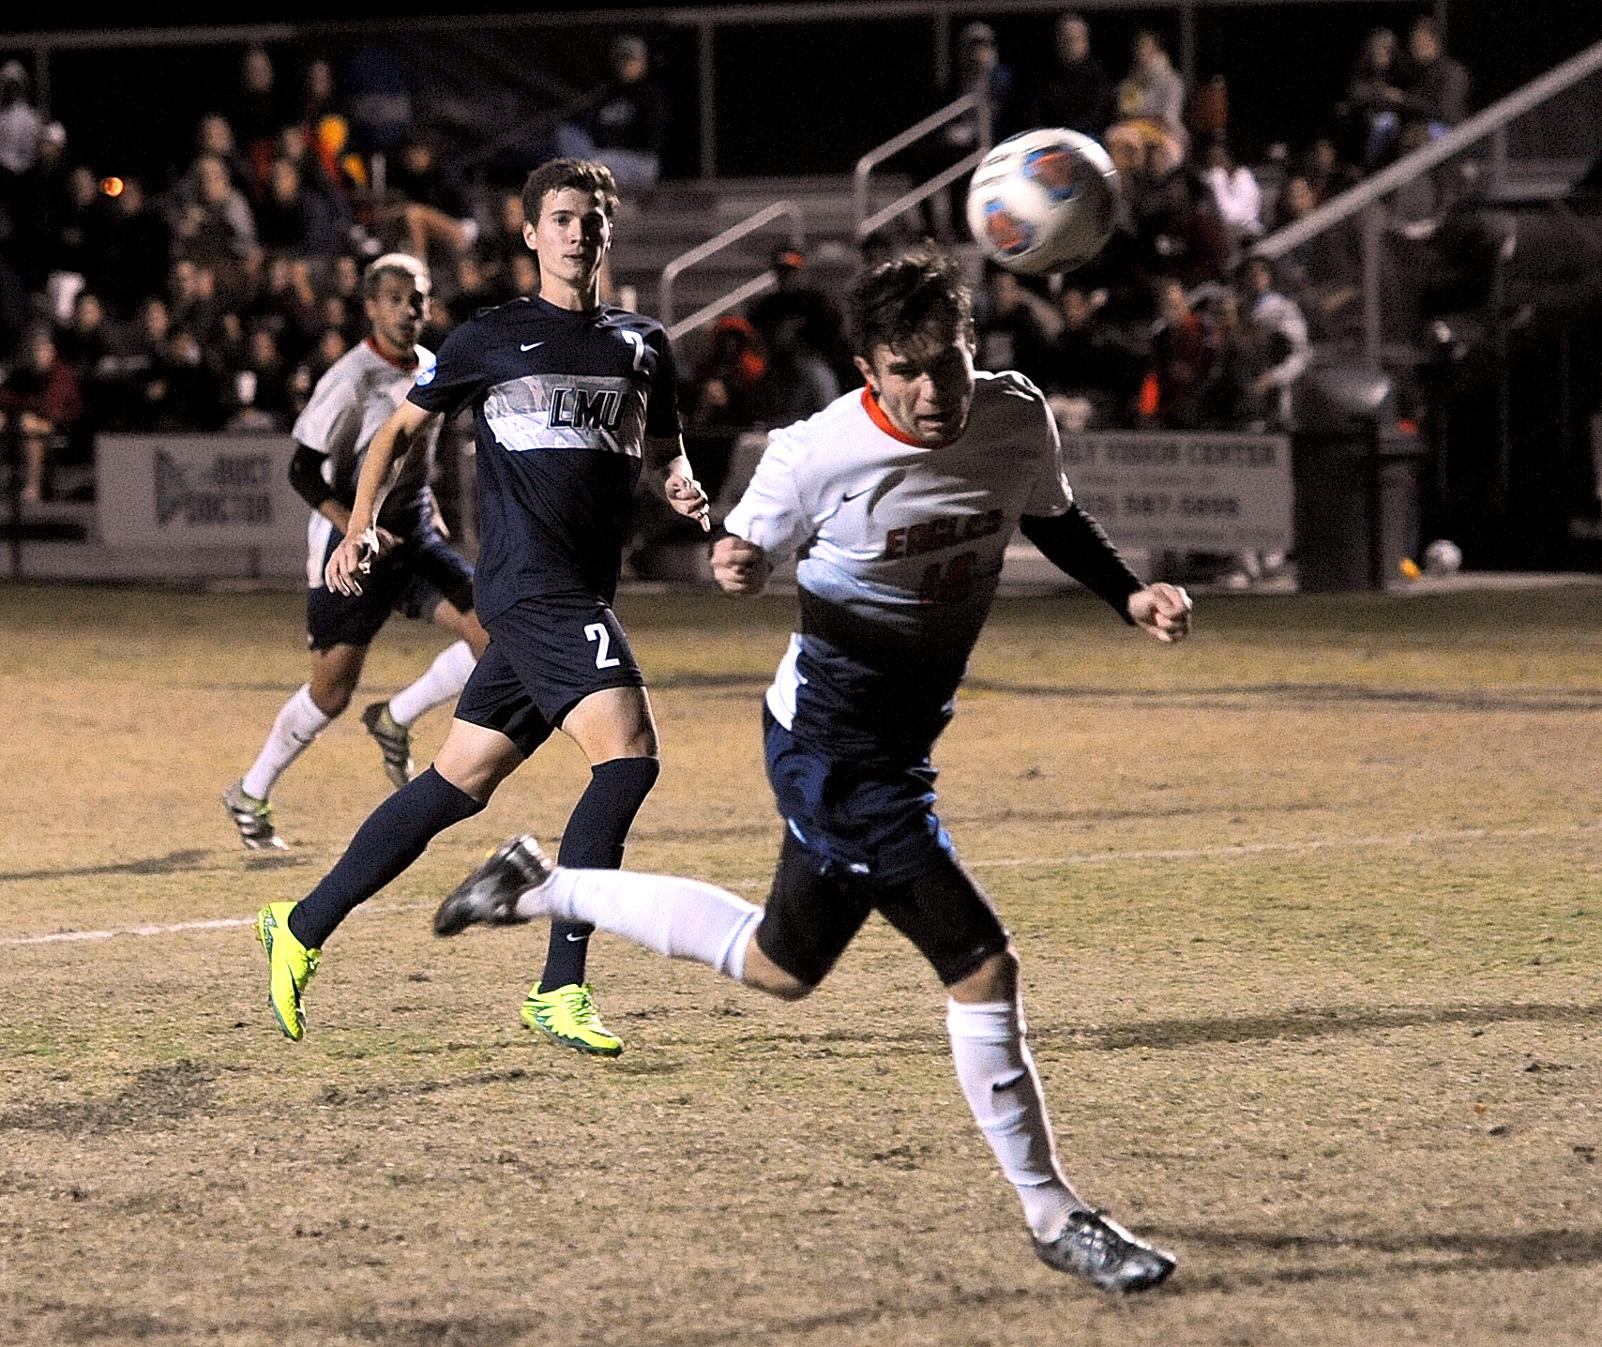 Peres, Ahlin key Railsplitters in 1-0 win over Eagles